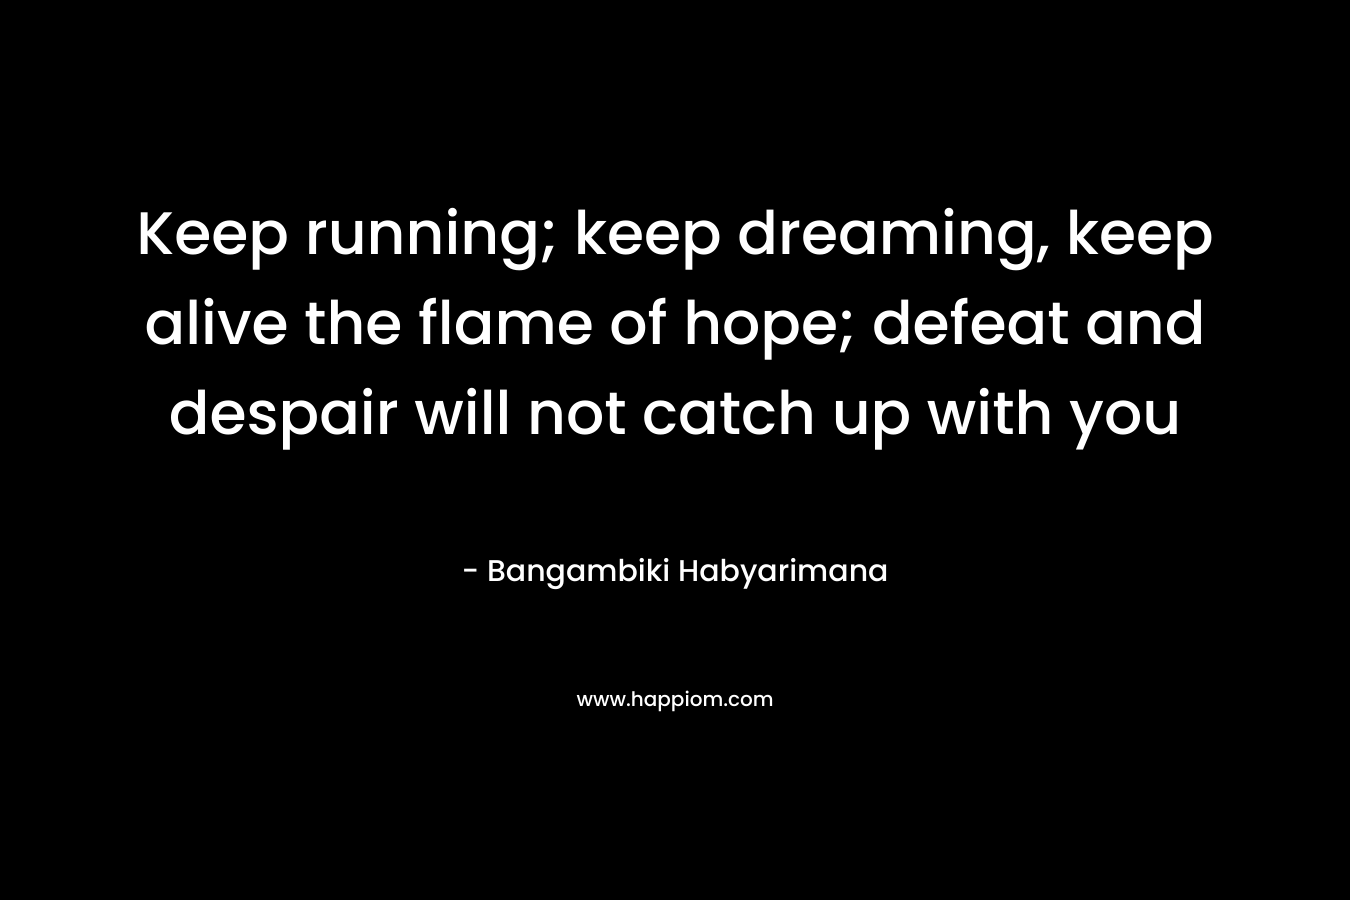 Keep running; keep dreaming, keep alive the flame of hope; defeat and despair will not catch up with you